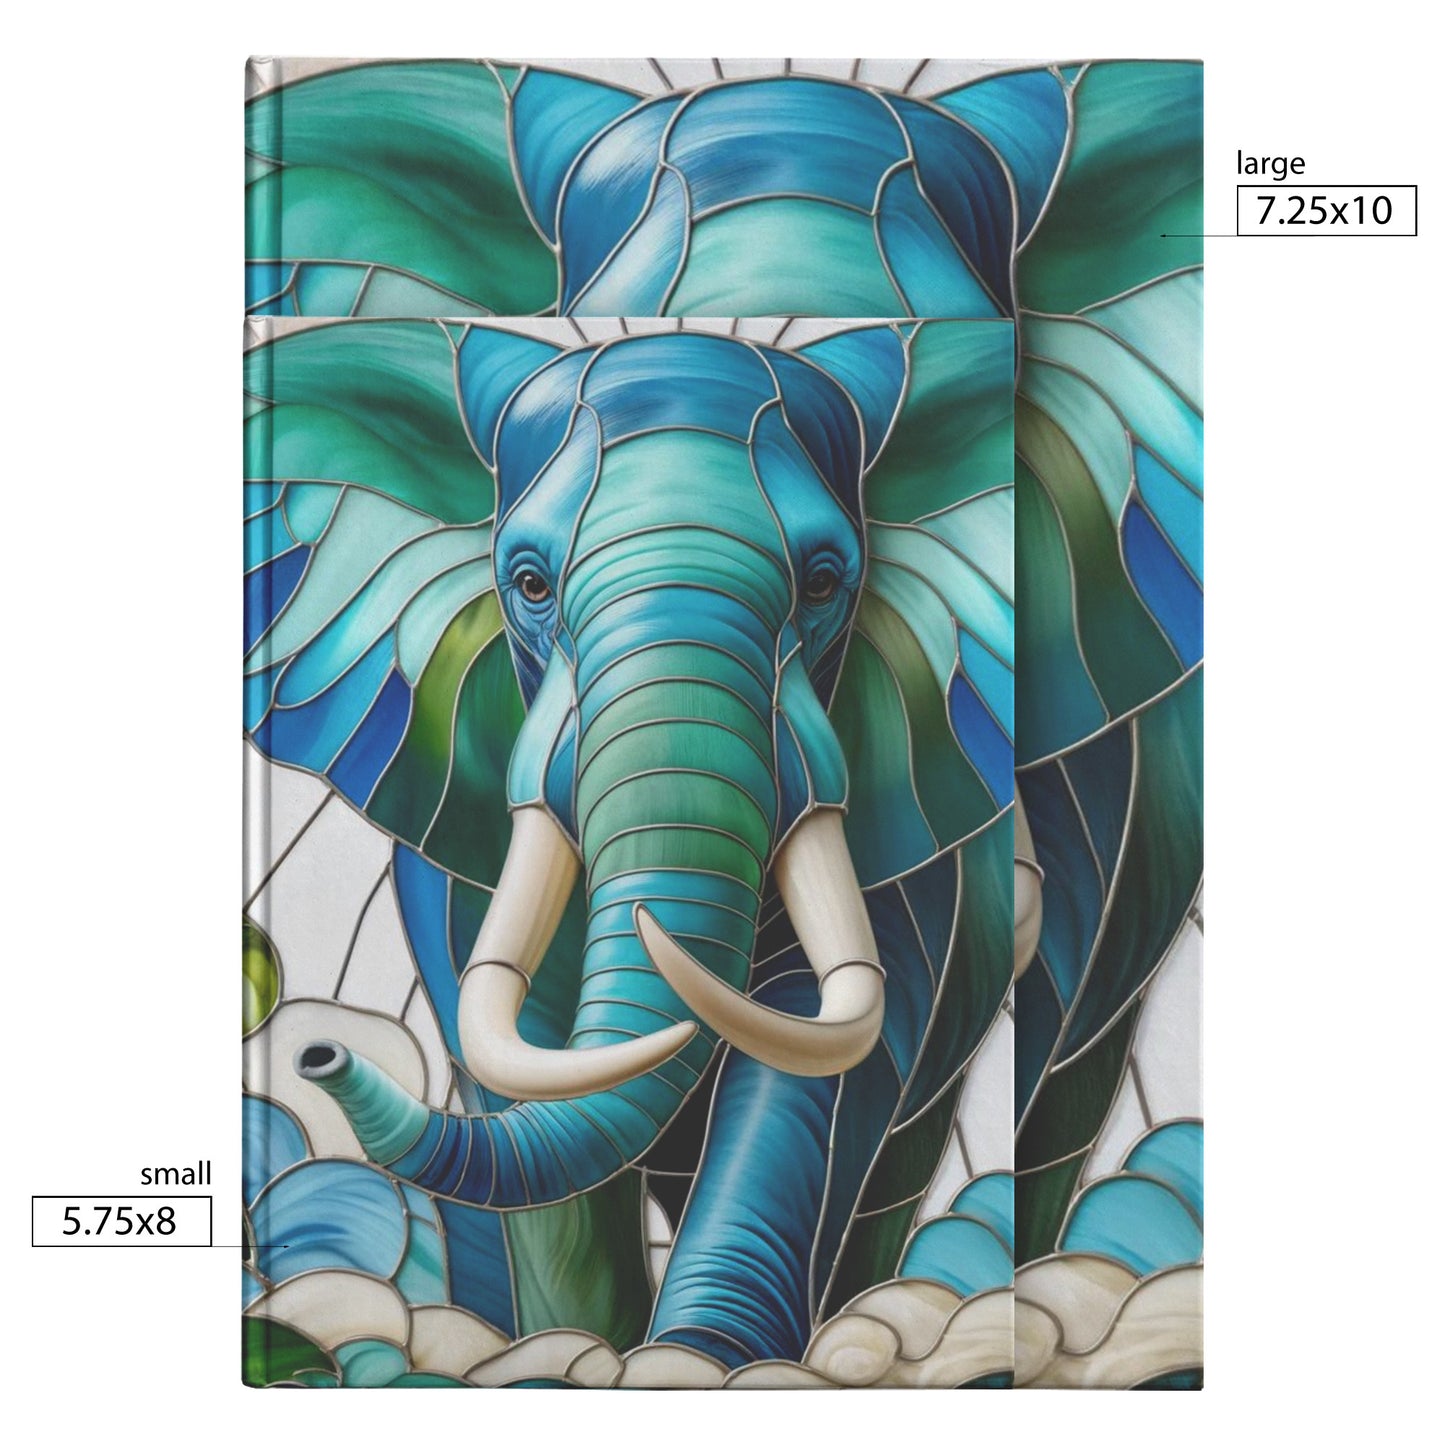 Stained Glass Elephant Journal